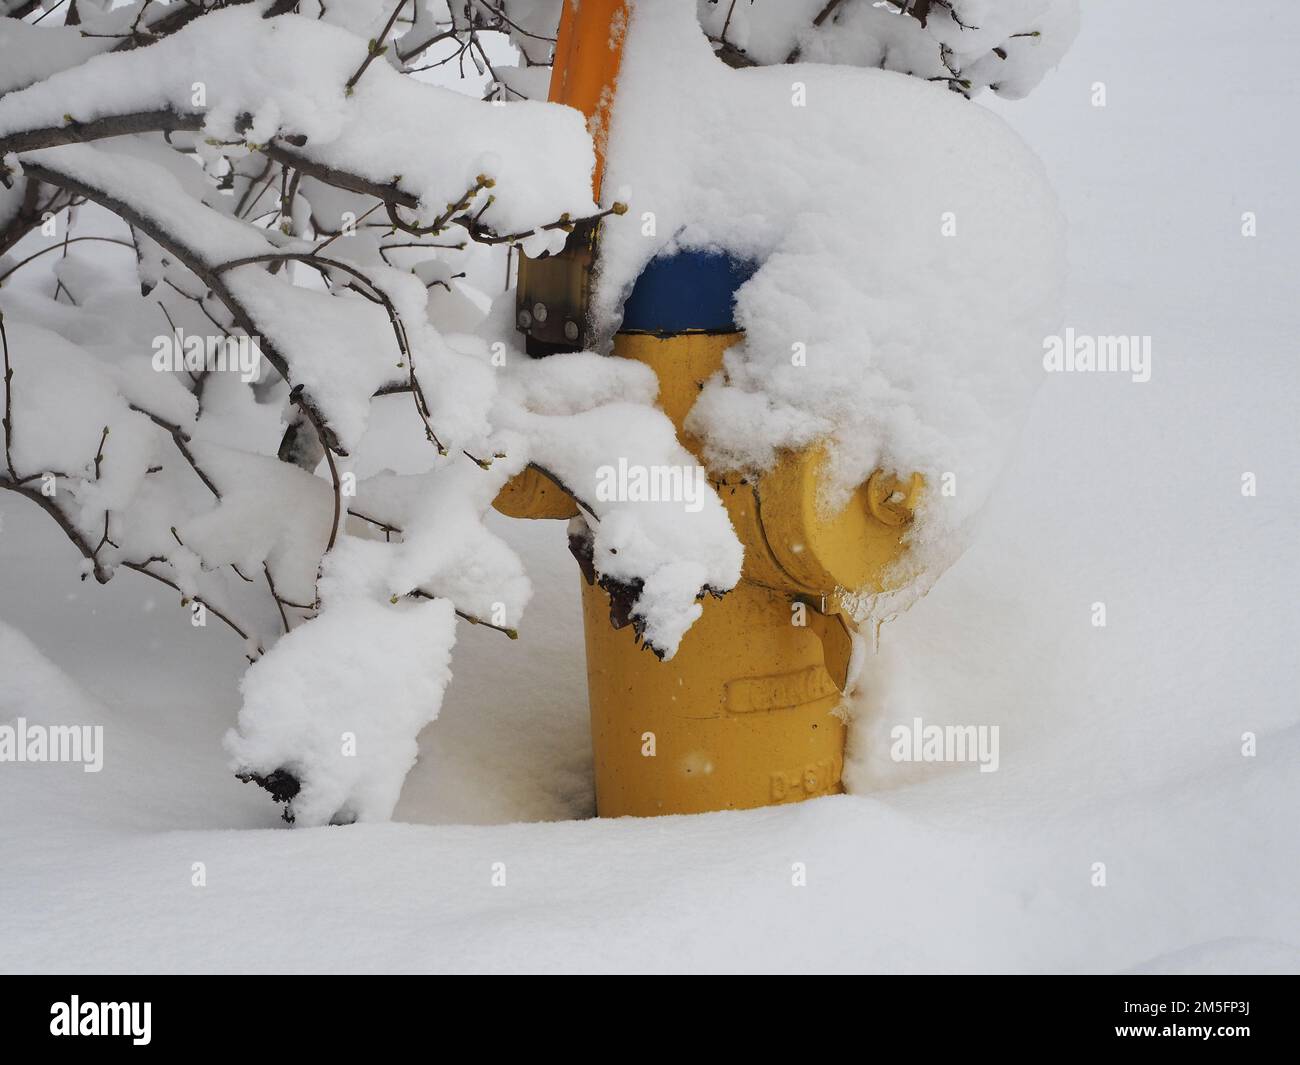 Heavy snowfall in Canada's capital turn the city into a winter wonderland just in time for Christmas. Yellow fire hydrant covered in snow. Stock Photo